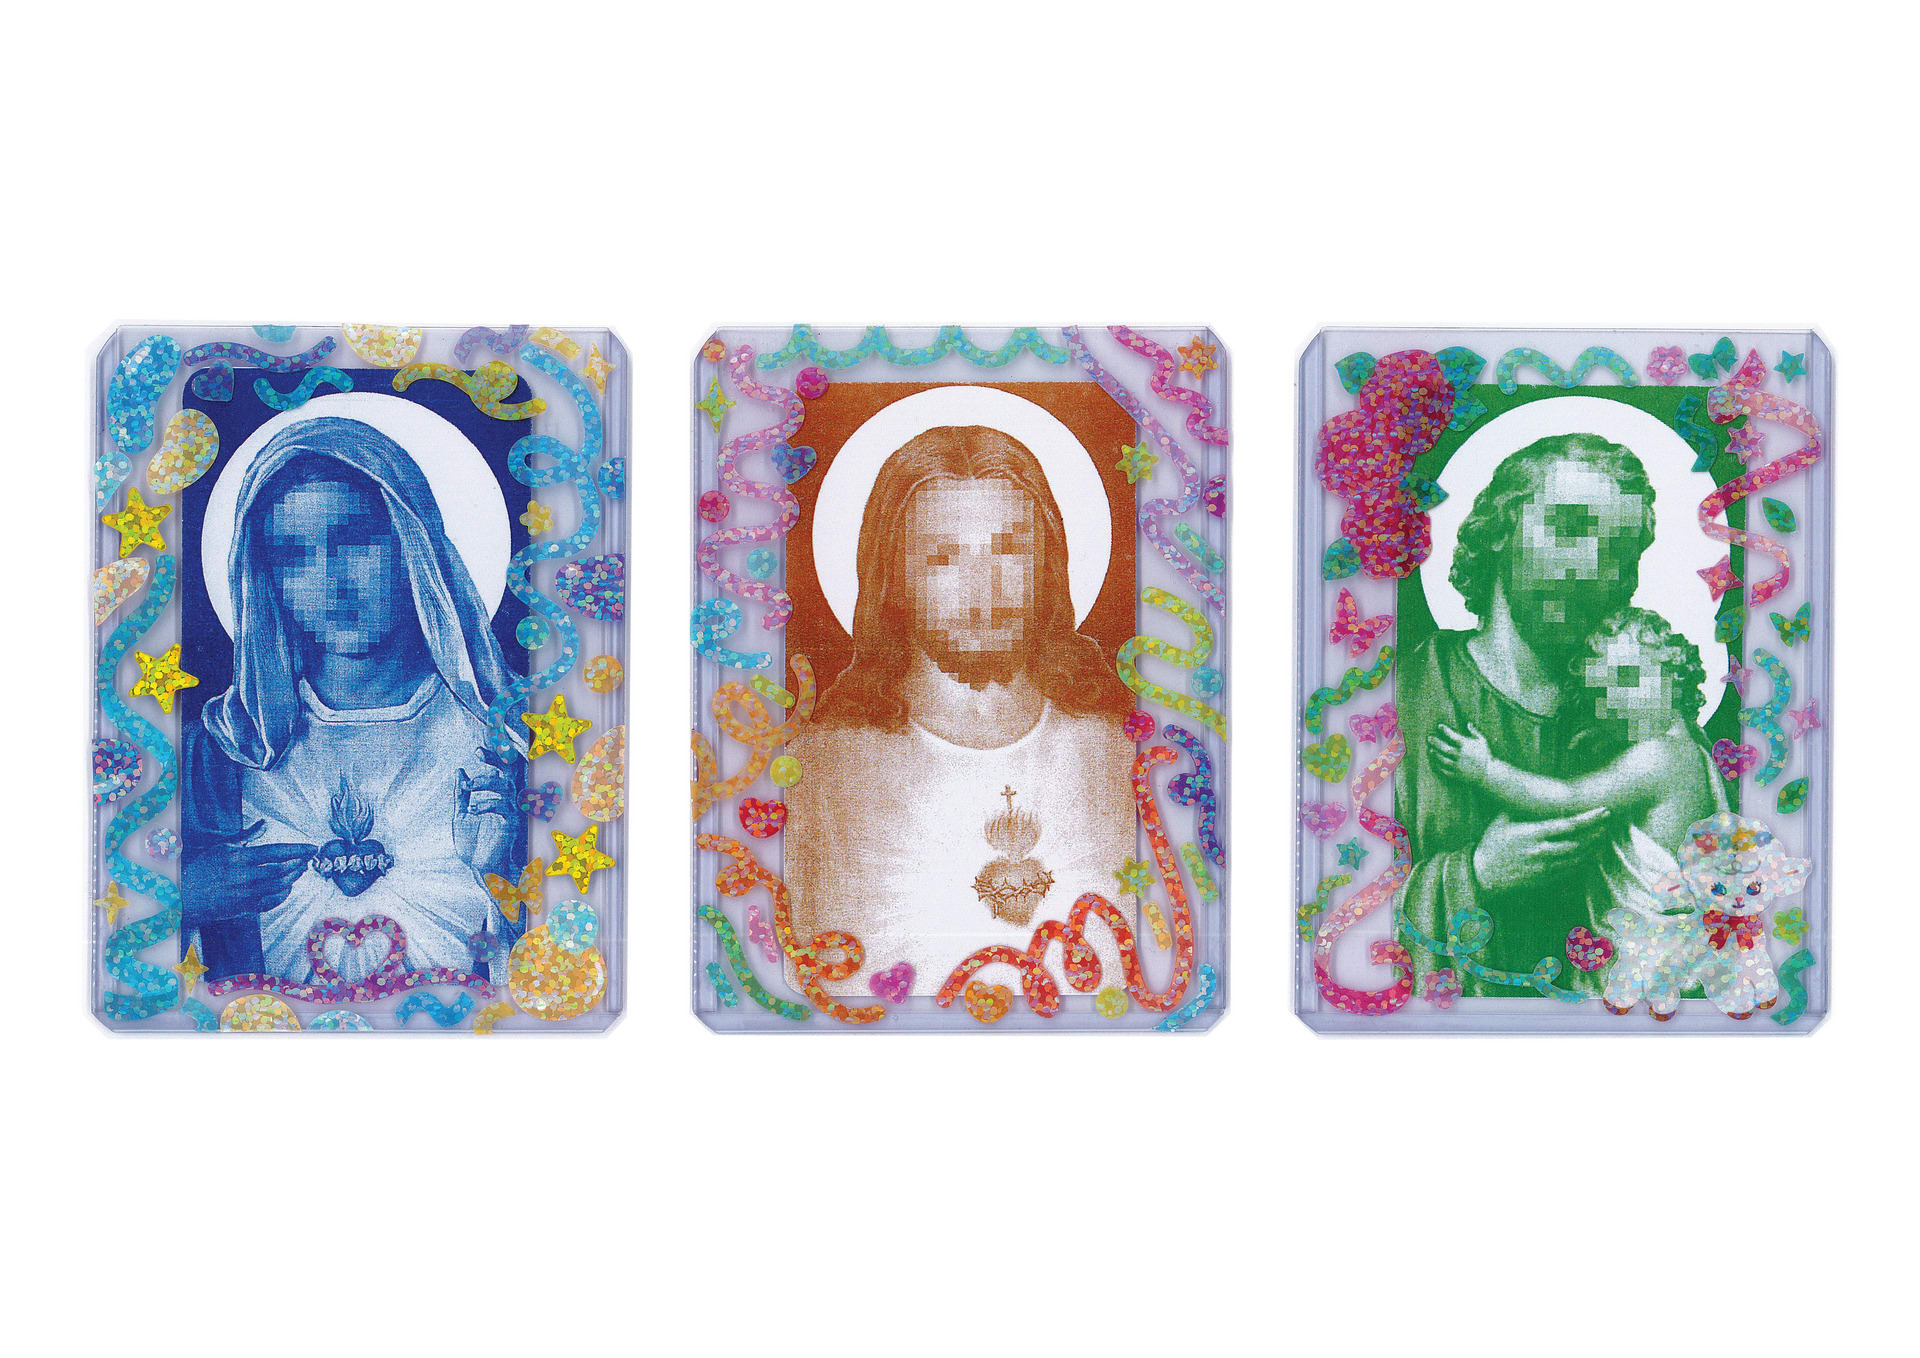 A poster with digital portraits of the Virgin Mary, Jesus Christ, and St. Joseph